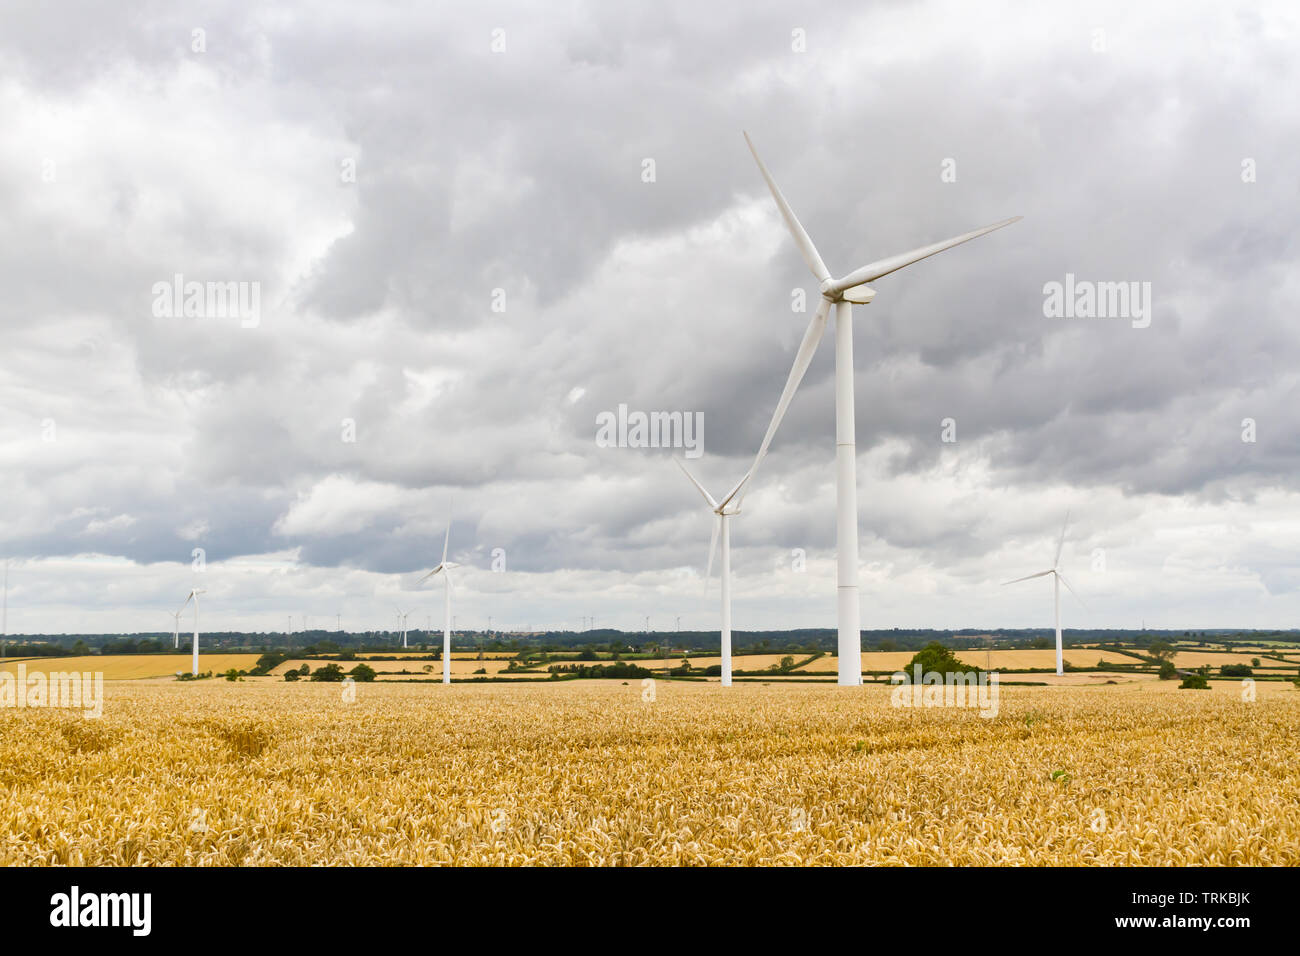 Crick, Northamptonshire, UK: Five wind turbines stand in a field of ripe, yellow wheat beneath a sky of thick grey clouds. Stock Photo